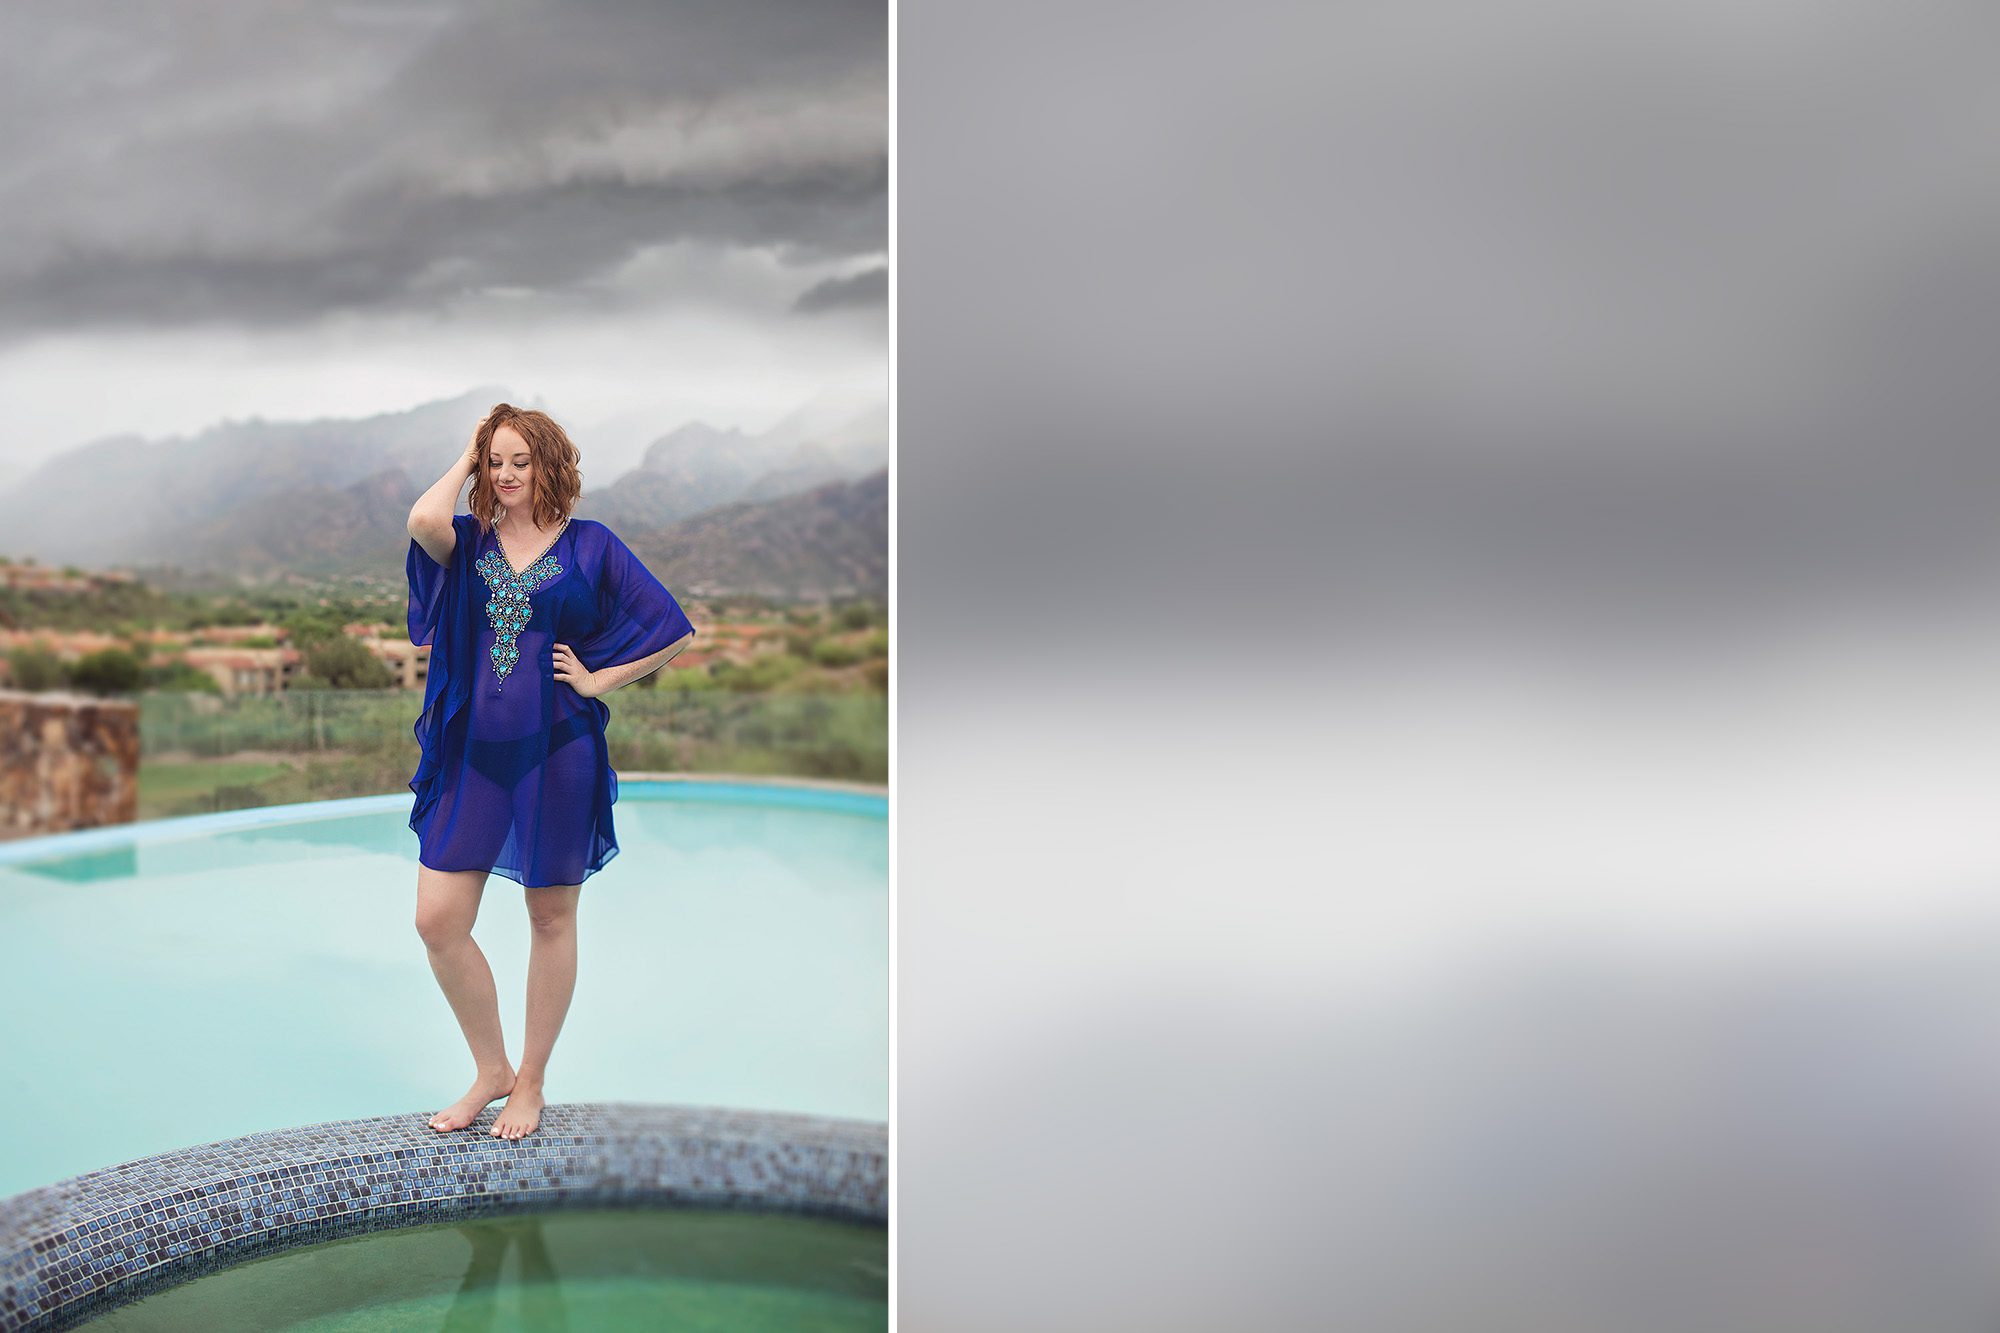 The Hacienda Del Sol resort pool and mountain views on a rainy day with Phoenix blogger Mandy Holmes